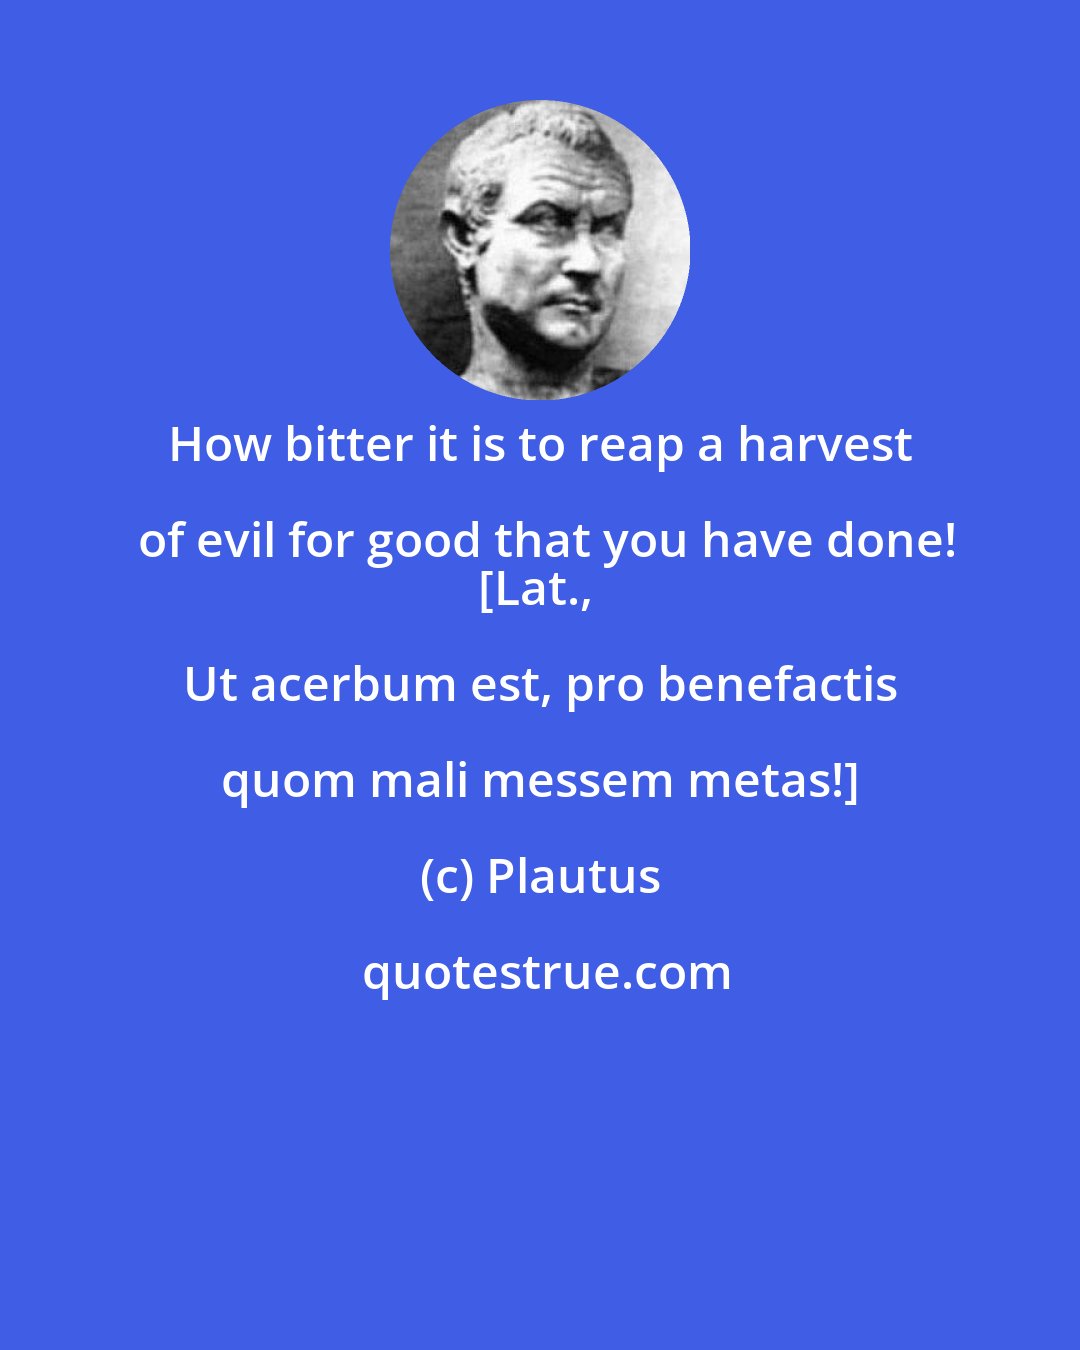 Plautus: How bitter it is to reap a harvest of evil for good that you have done!
[Lat., Ut acerbum est, pro benefactis quom mali messem metas!]